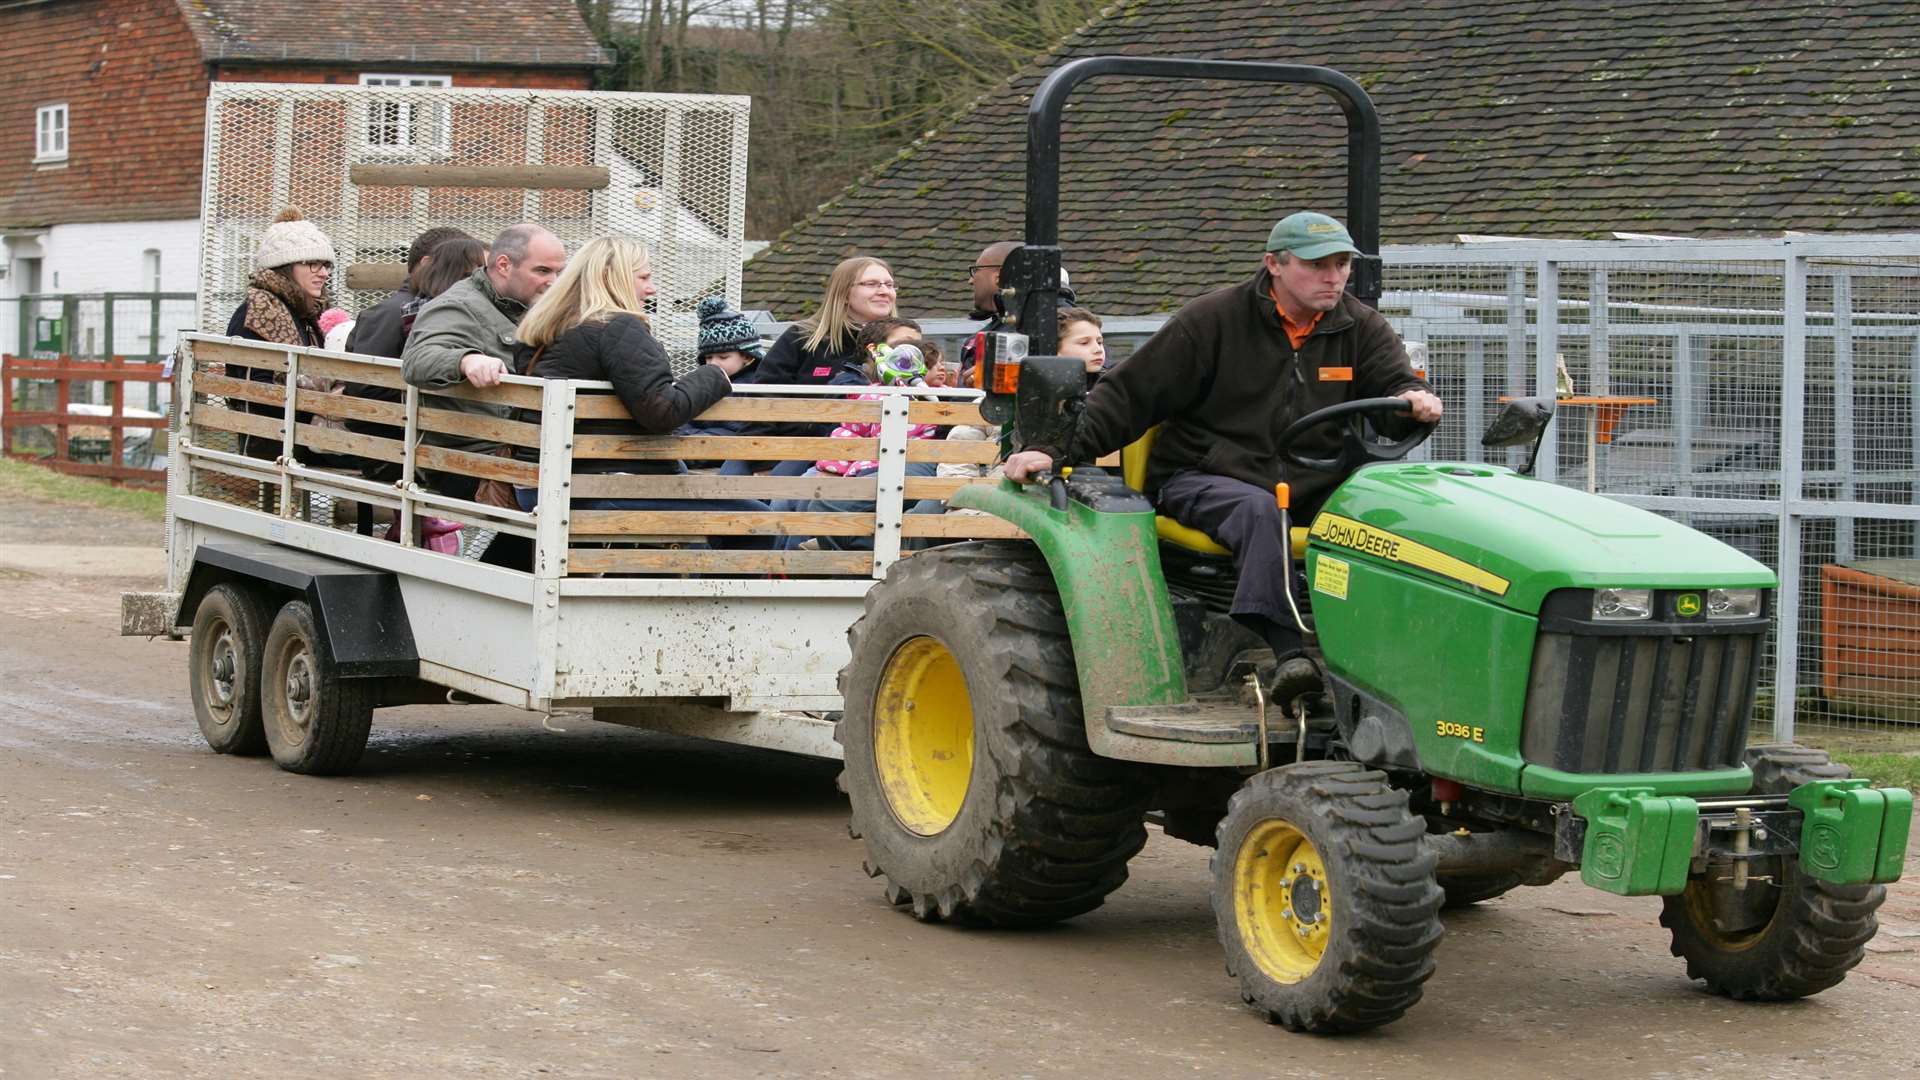 Half-term fun at Kent Life, including tractor/donkey rides, paint a potato and cuddle corner